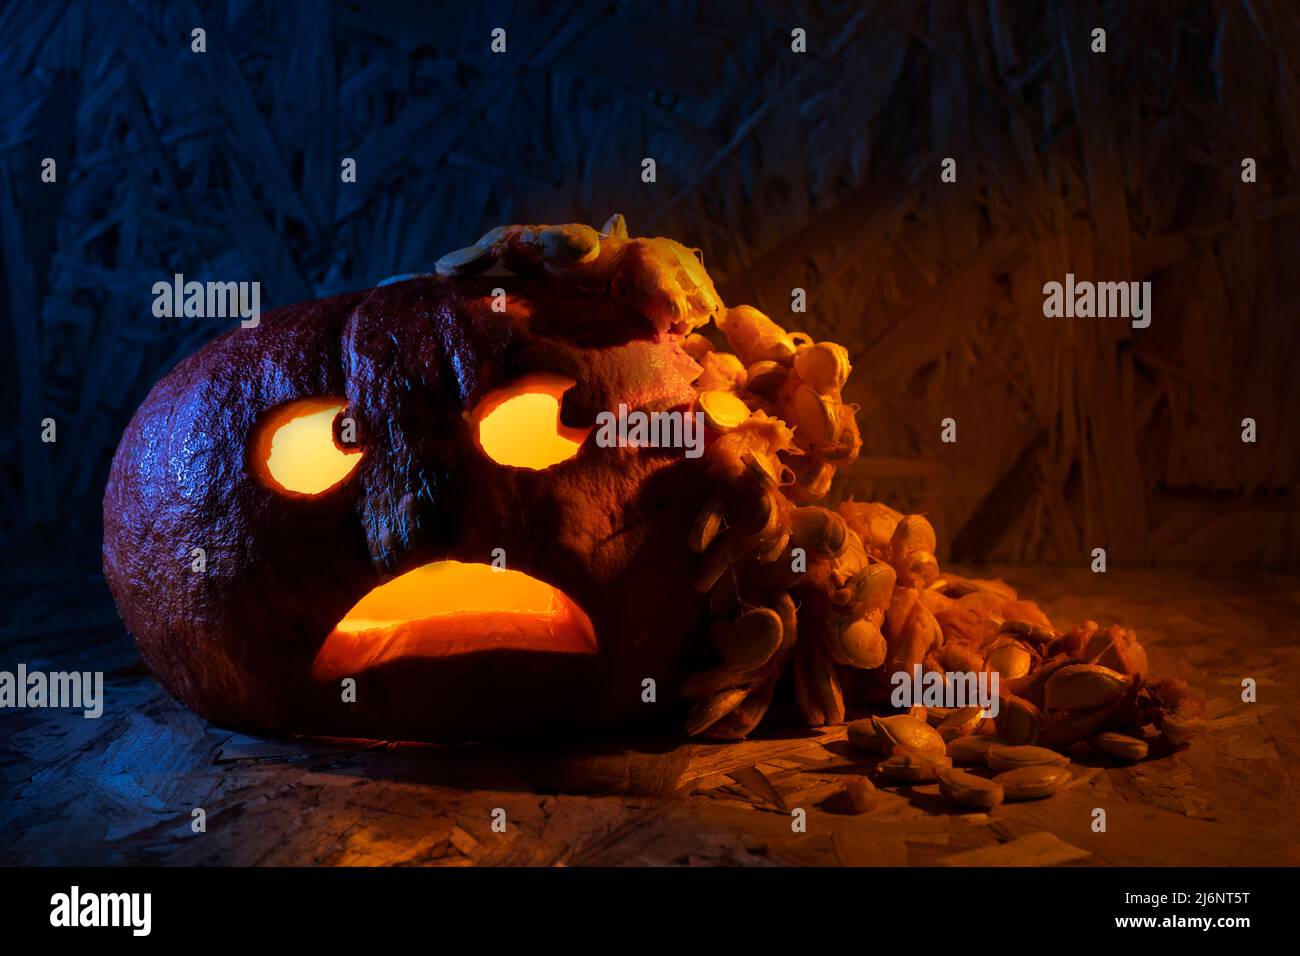 Funny vomiting carved halloween pumpkin. Stock Photo